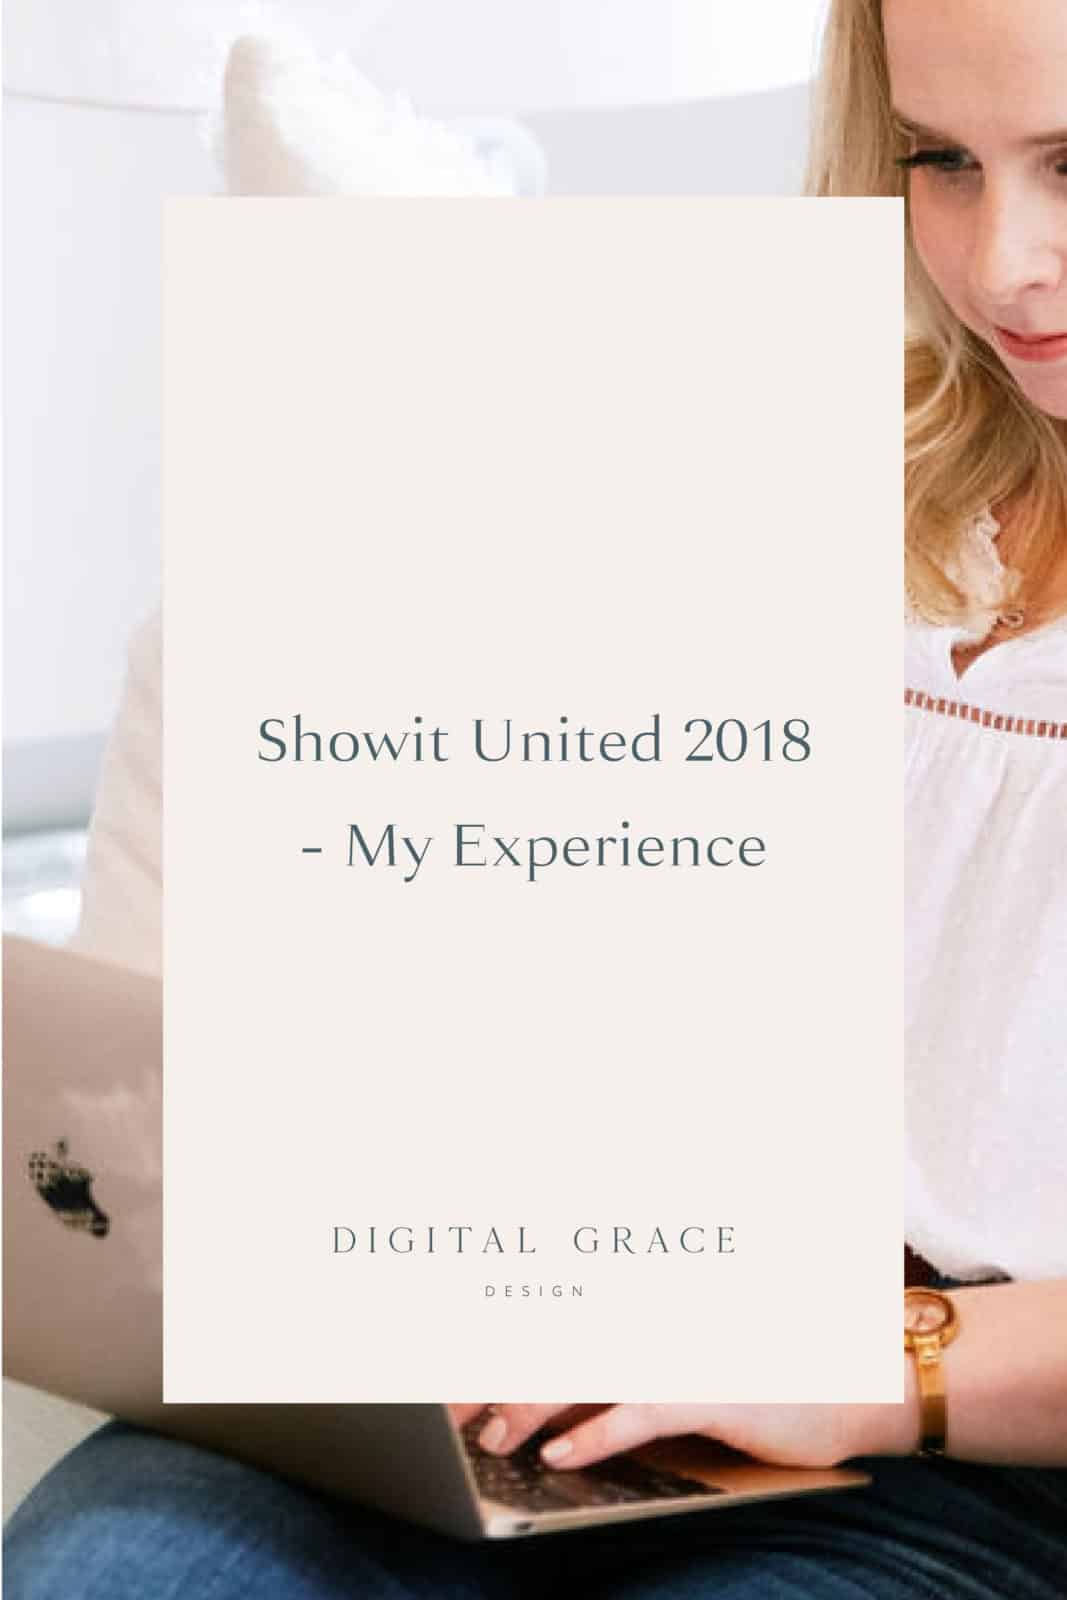 My Experience at Showit United 20118